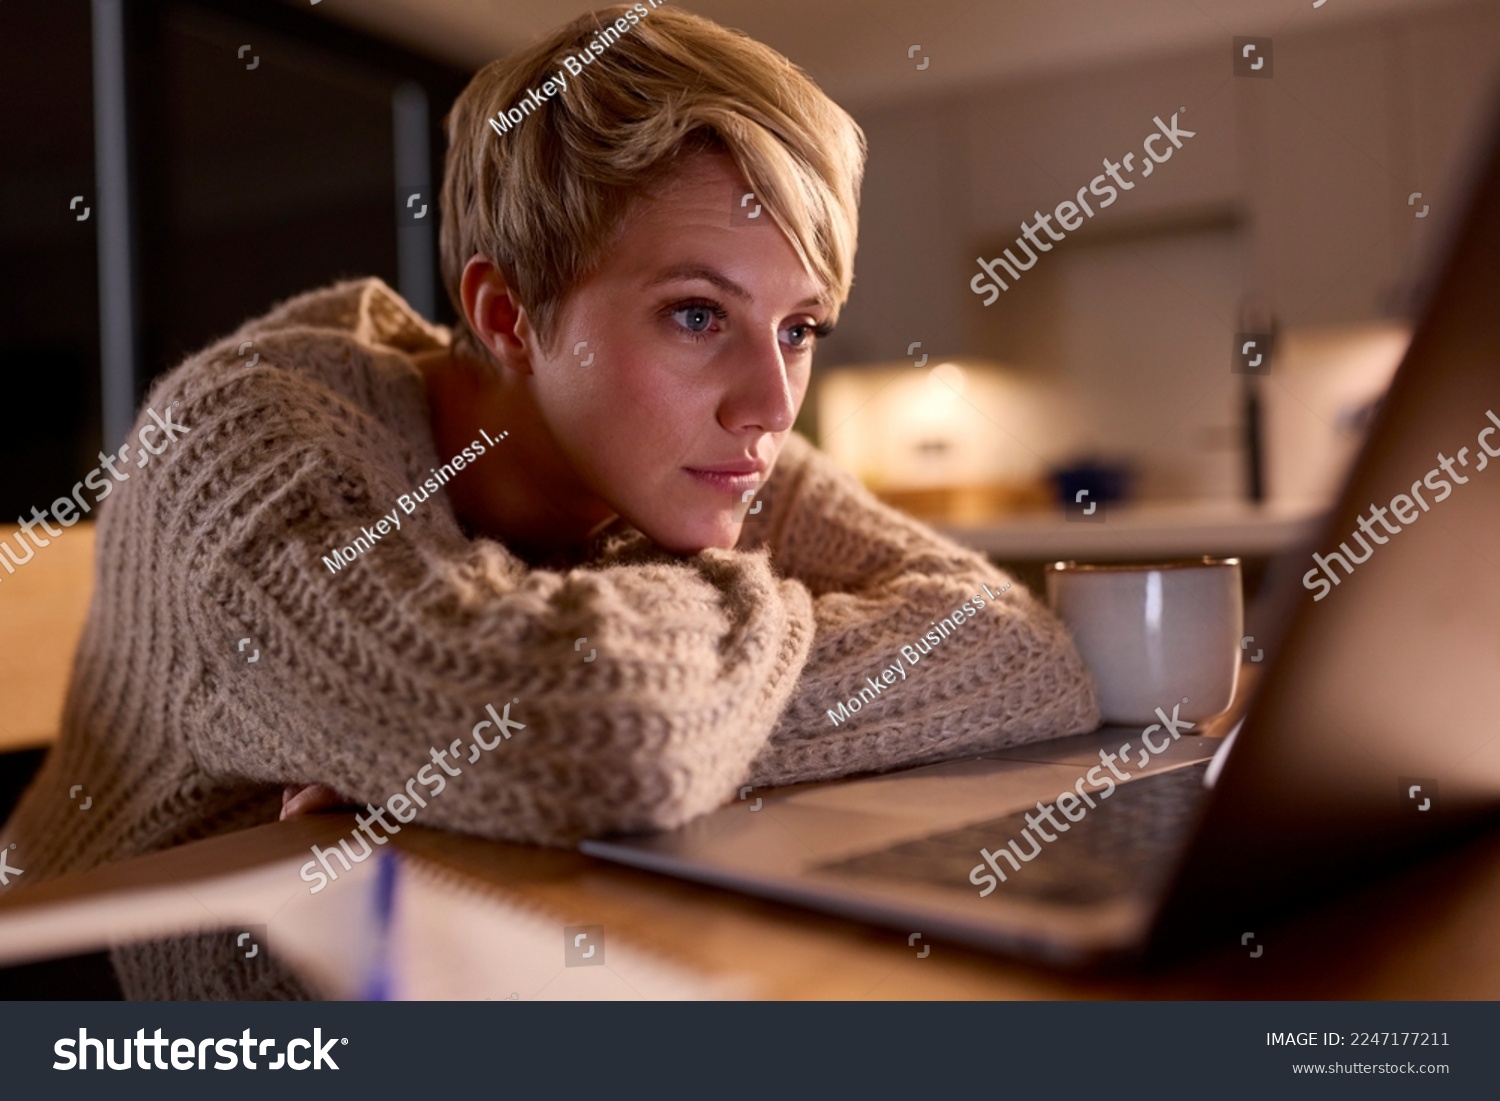 Young Woman Working Or Studying On Laptop At Home At Night Staring At Screen #2247177211